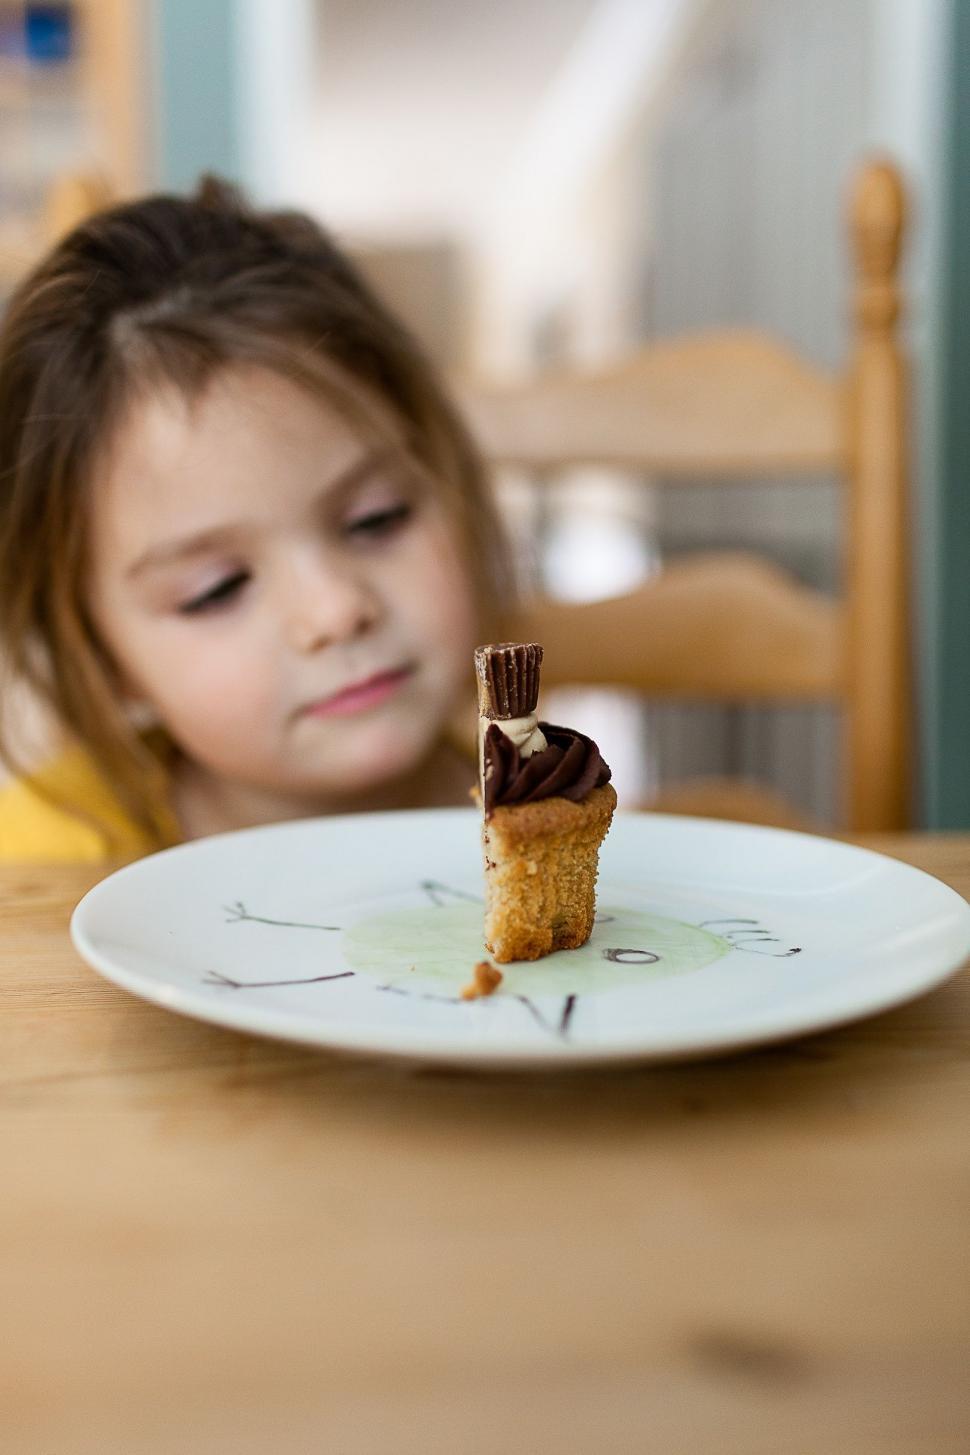 Free Image of Little Girl Sitting at Table With Cake 